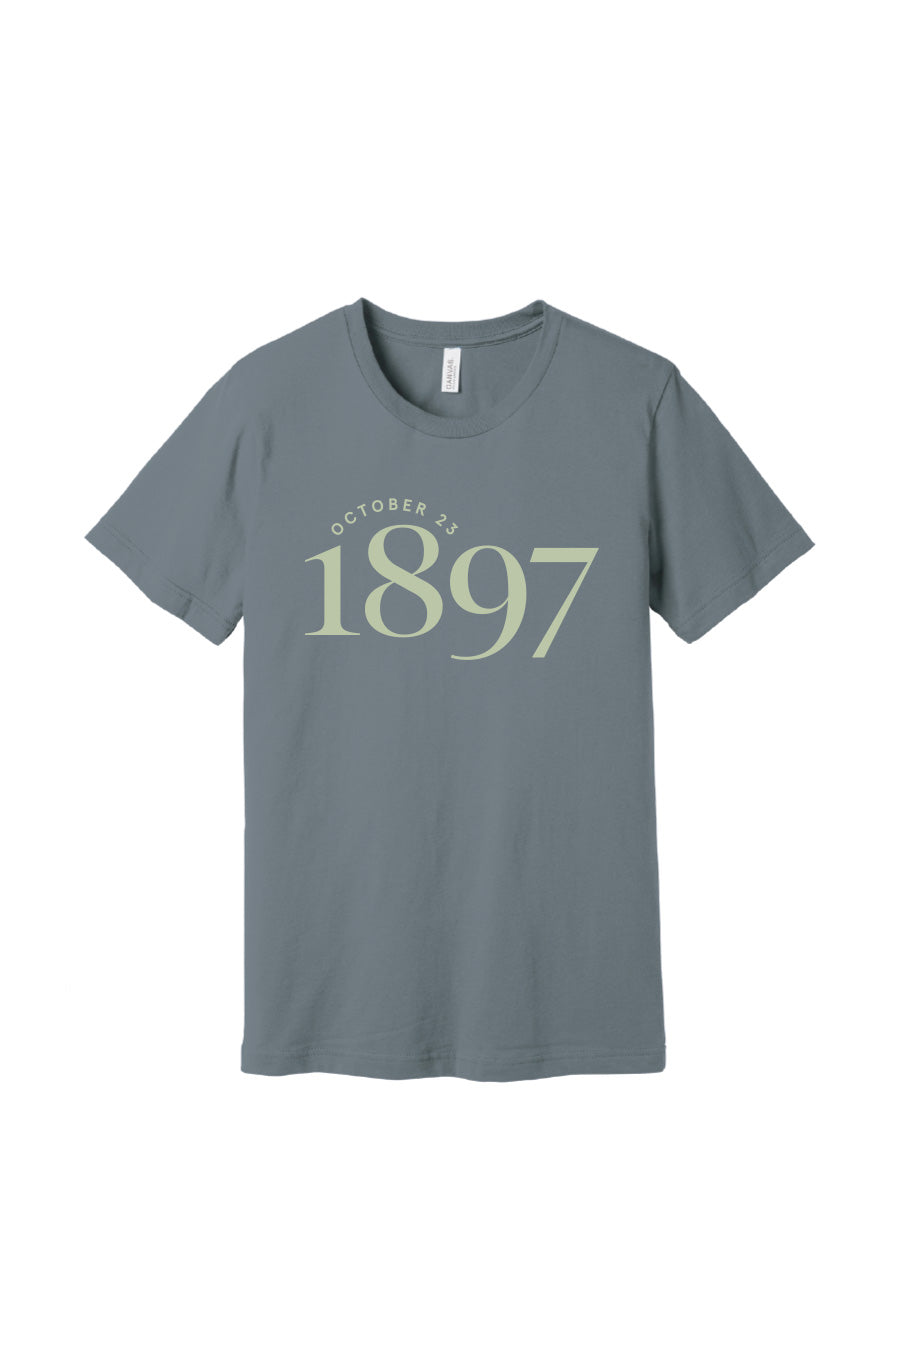 Madi Founders Day Tee